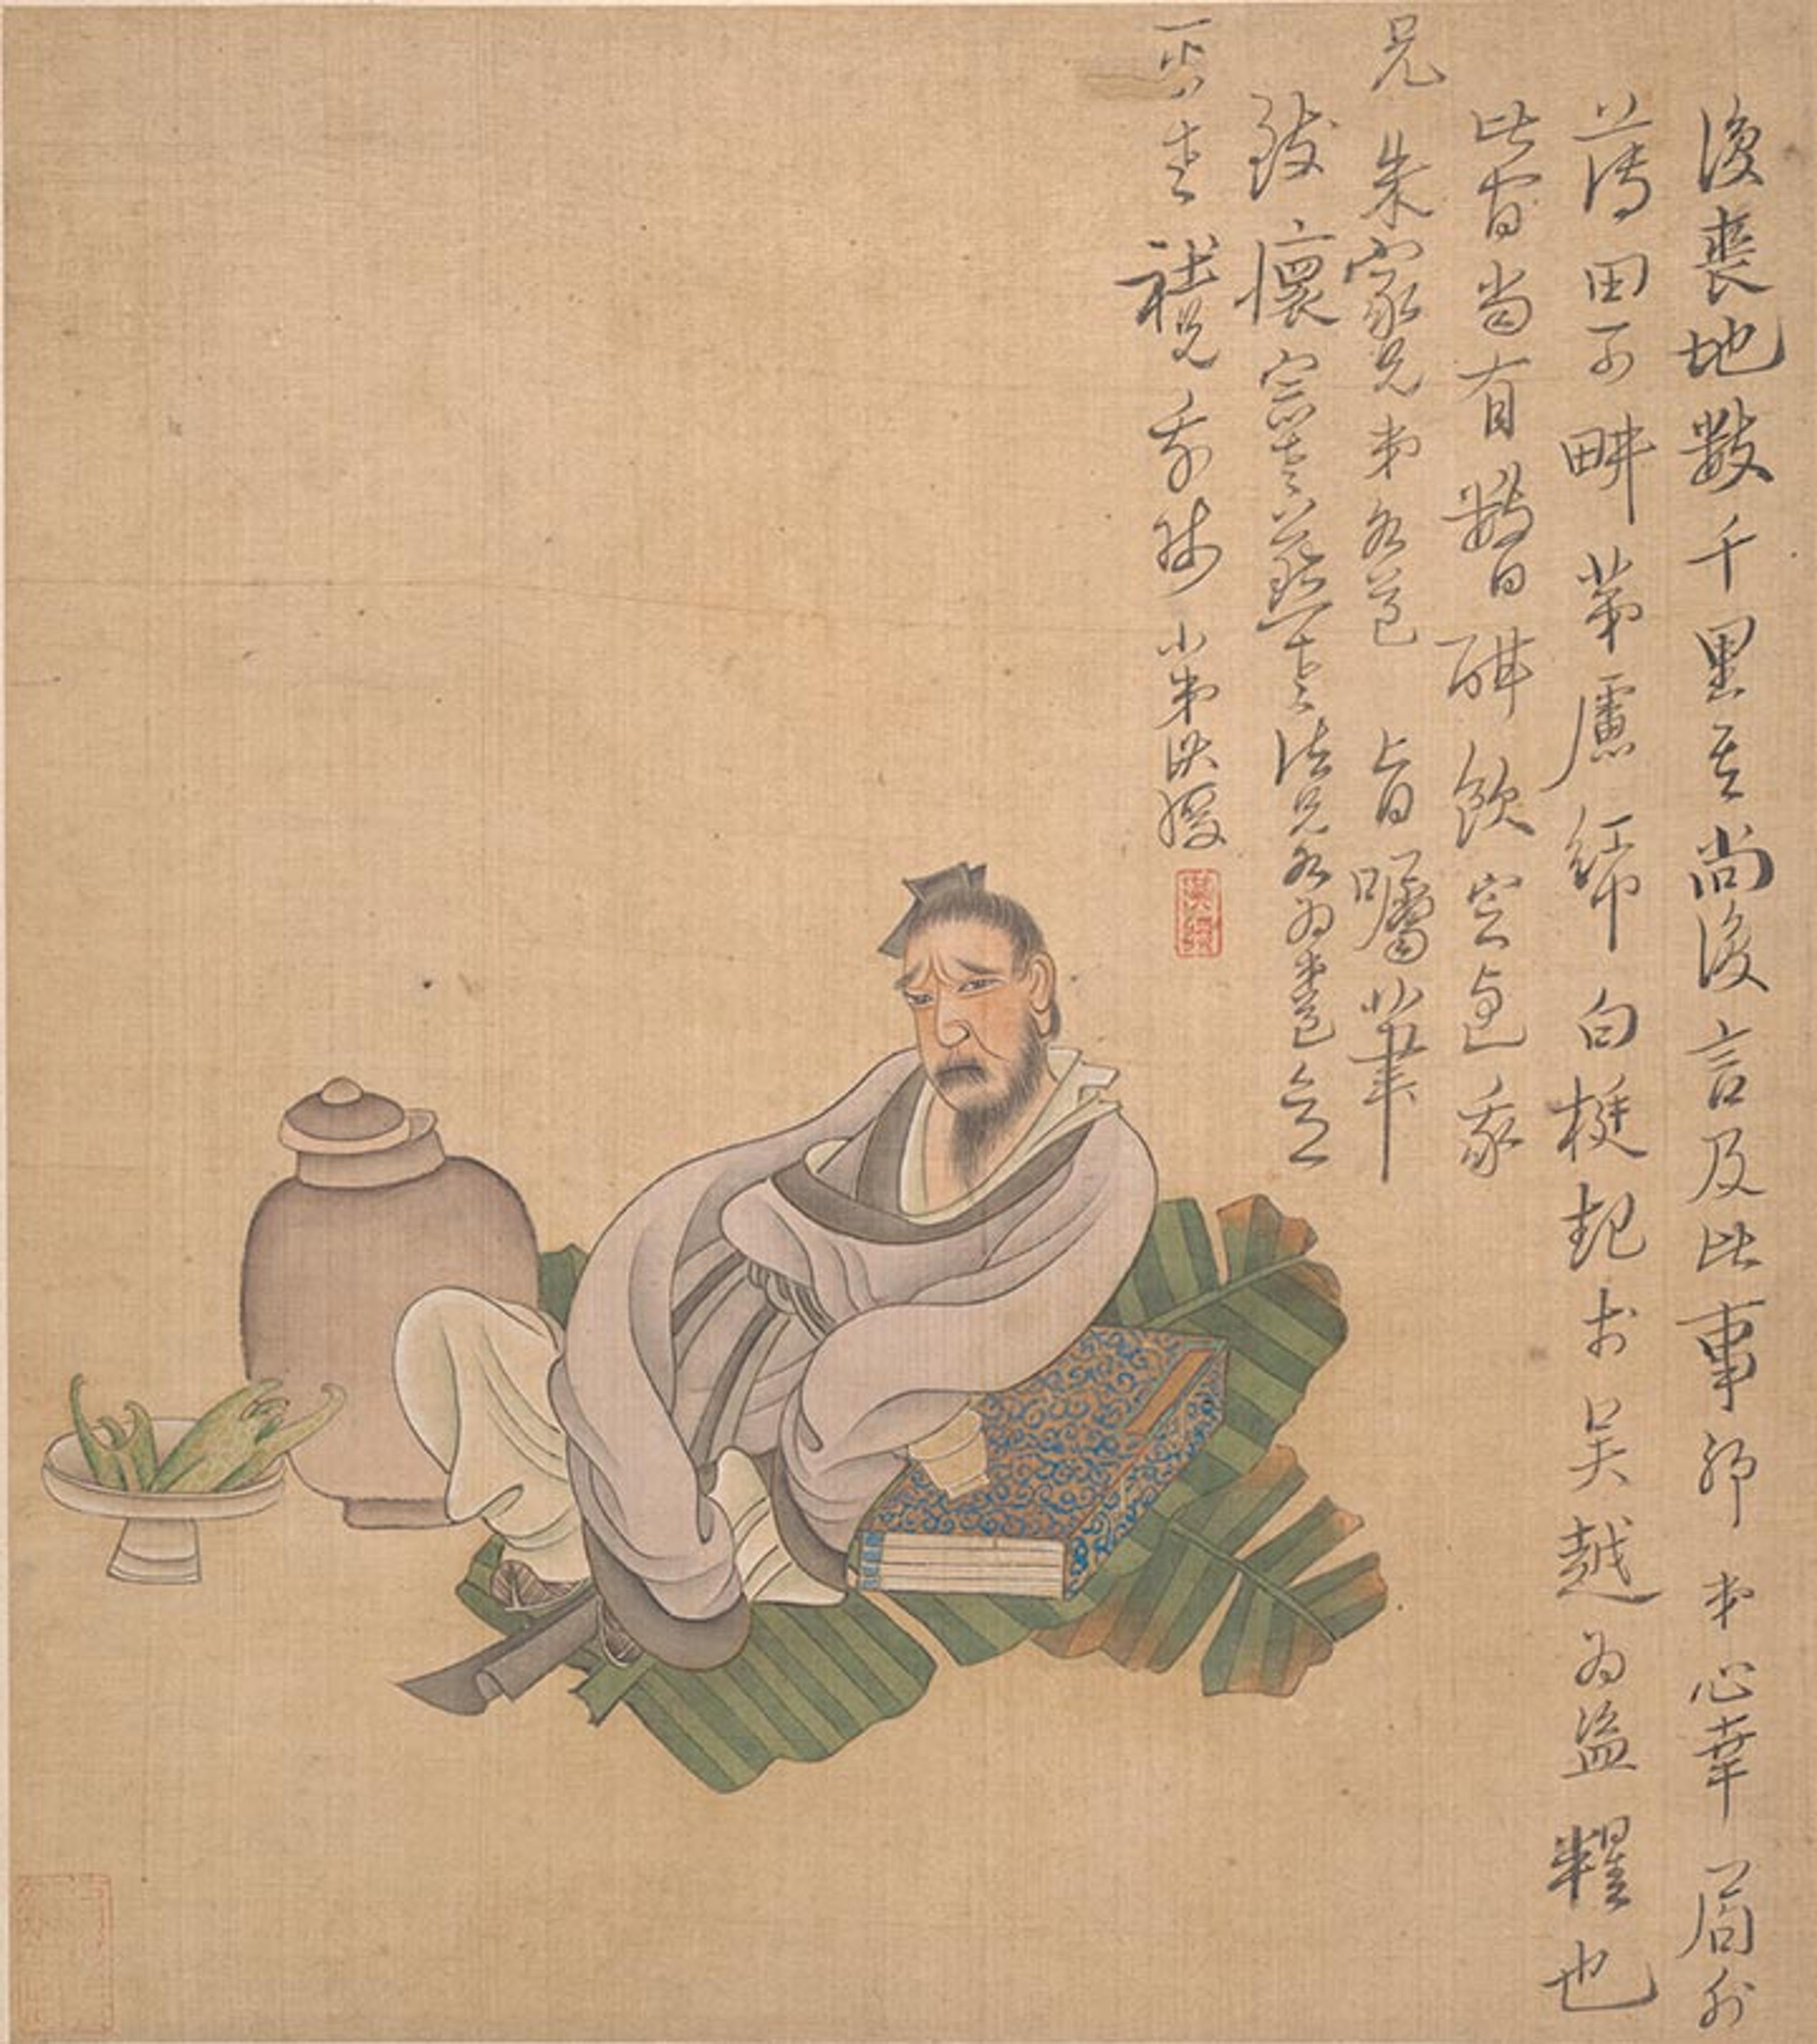 Painting depicting dejected man slumped on ground next to a jug